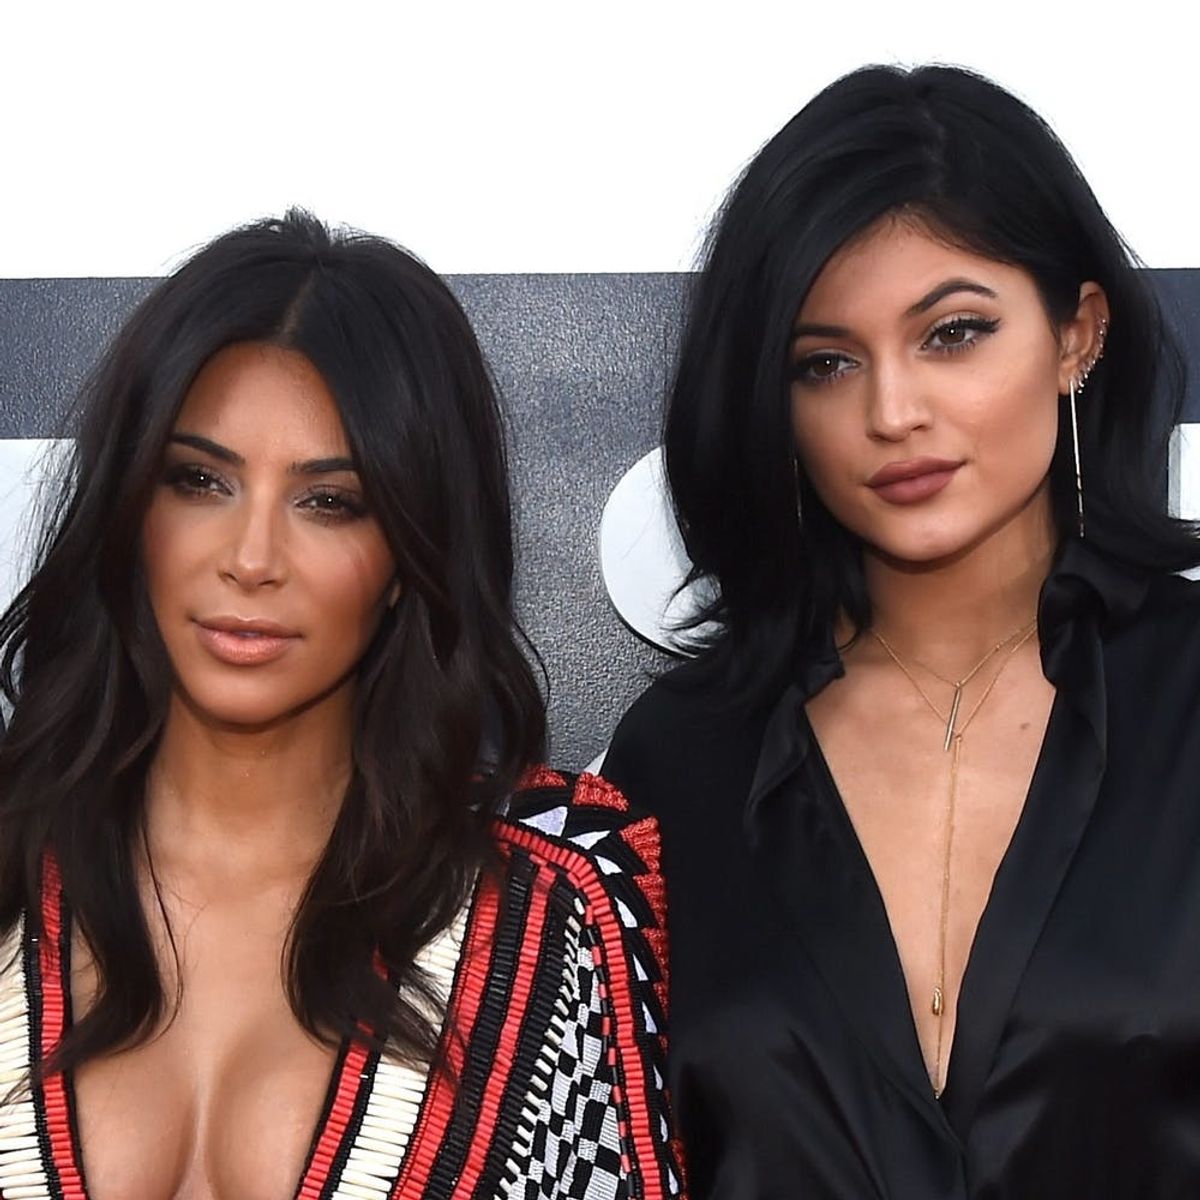 Kim Kardashian West Responds to Stories About Kylie Jenner’s Rumored Pregnancy